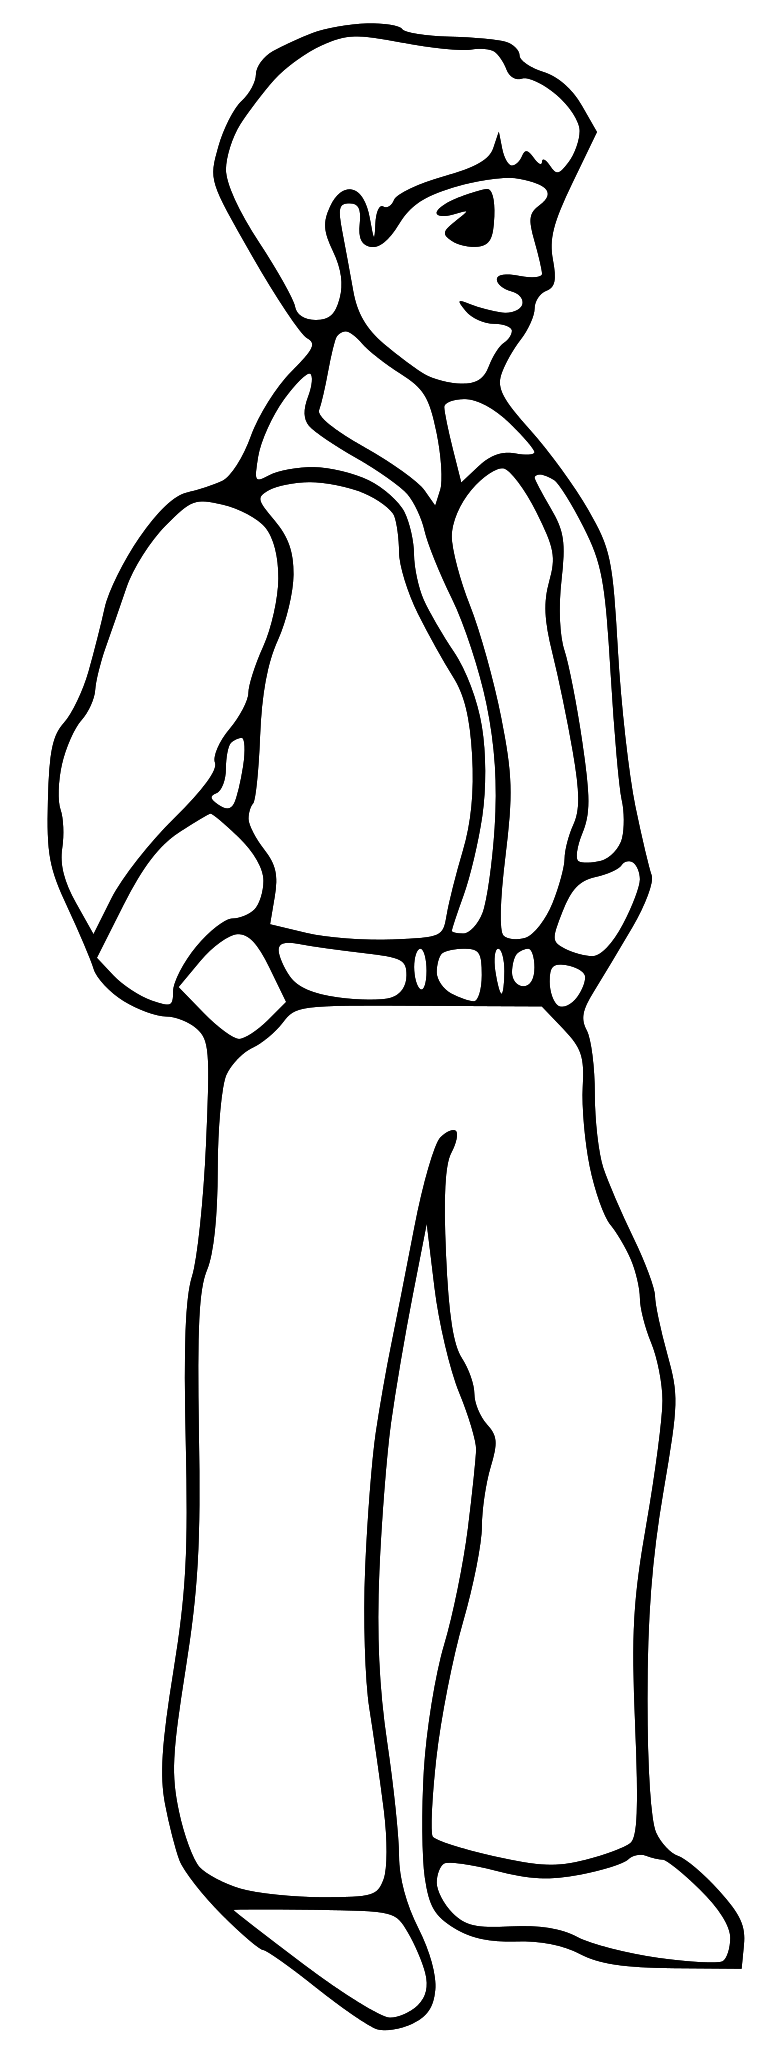 Boy standing clipart black and white